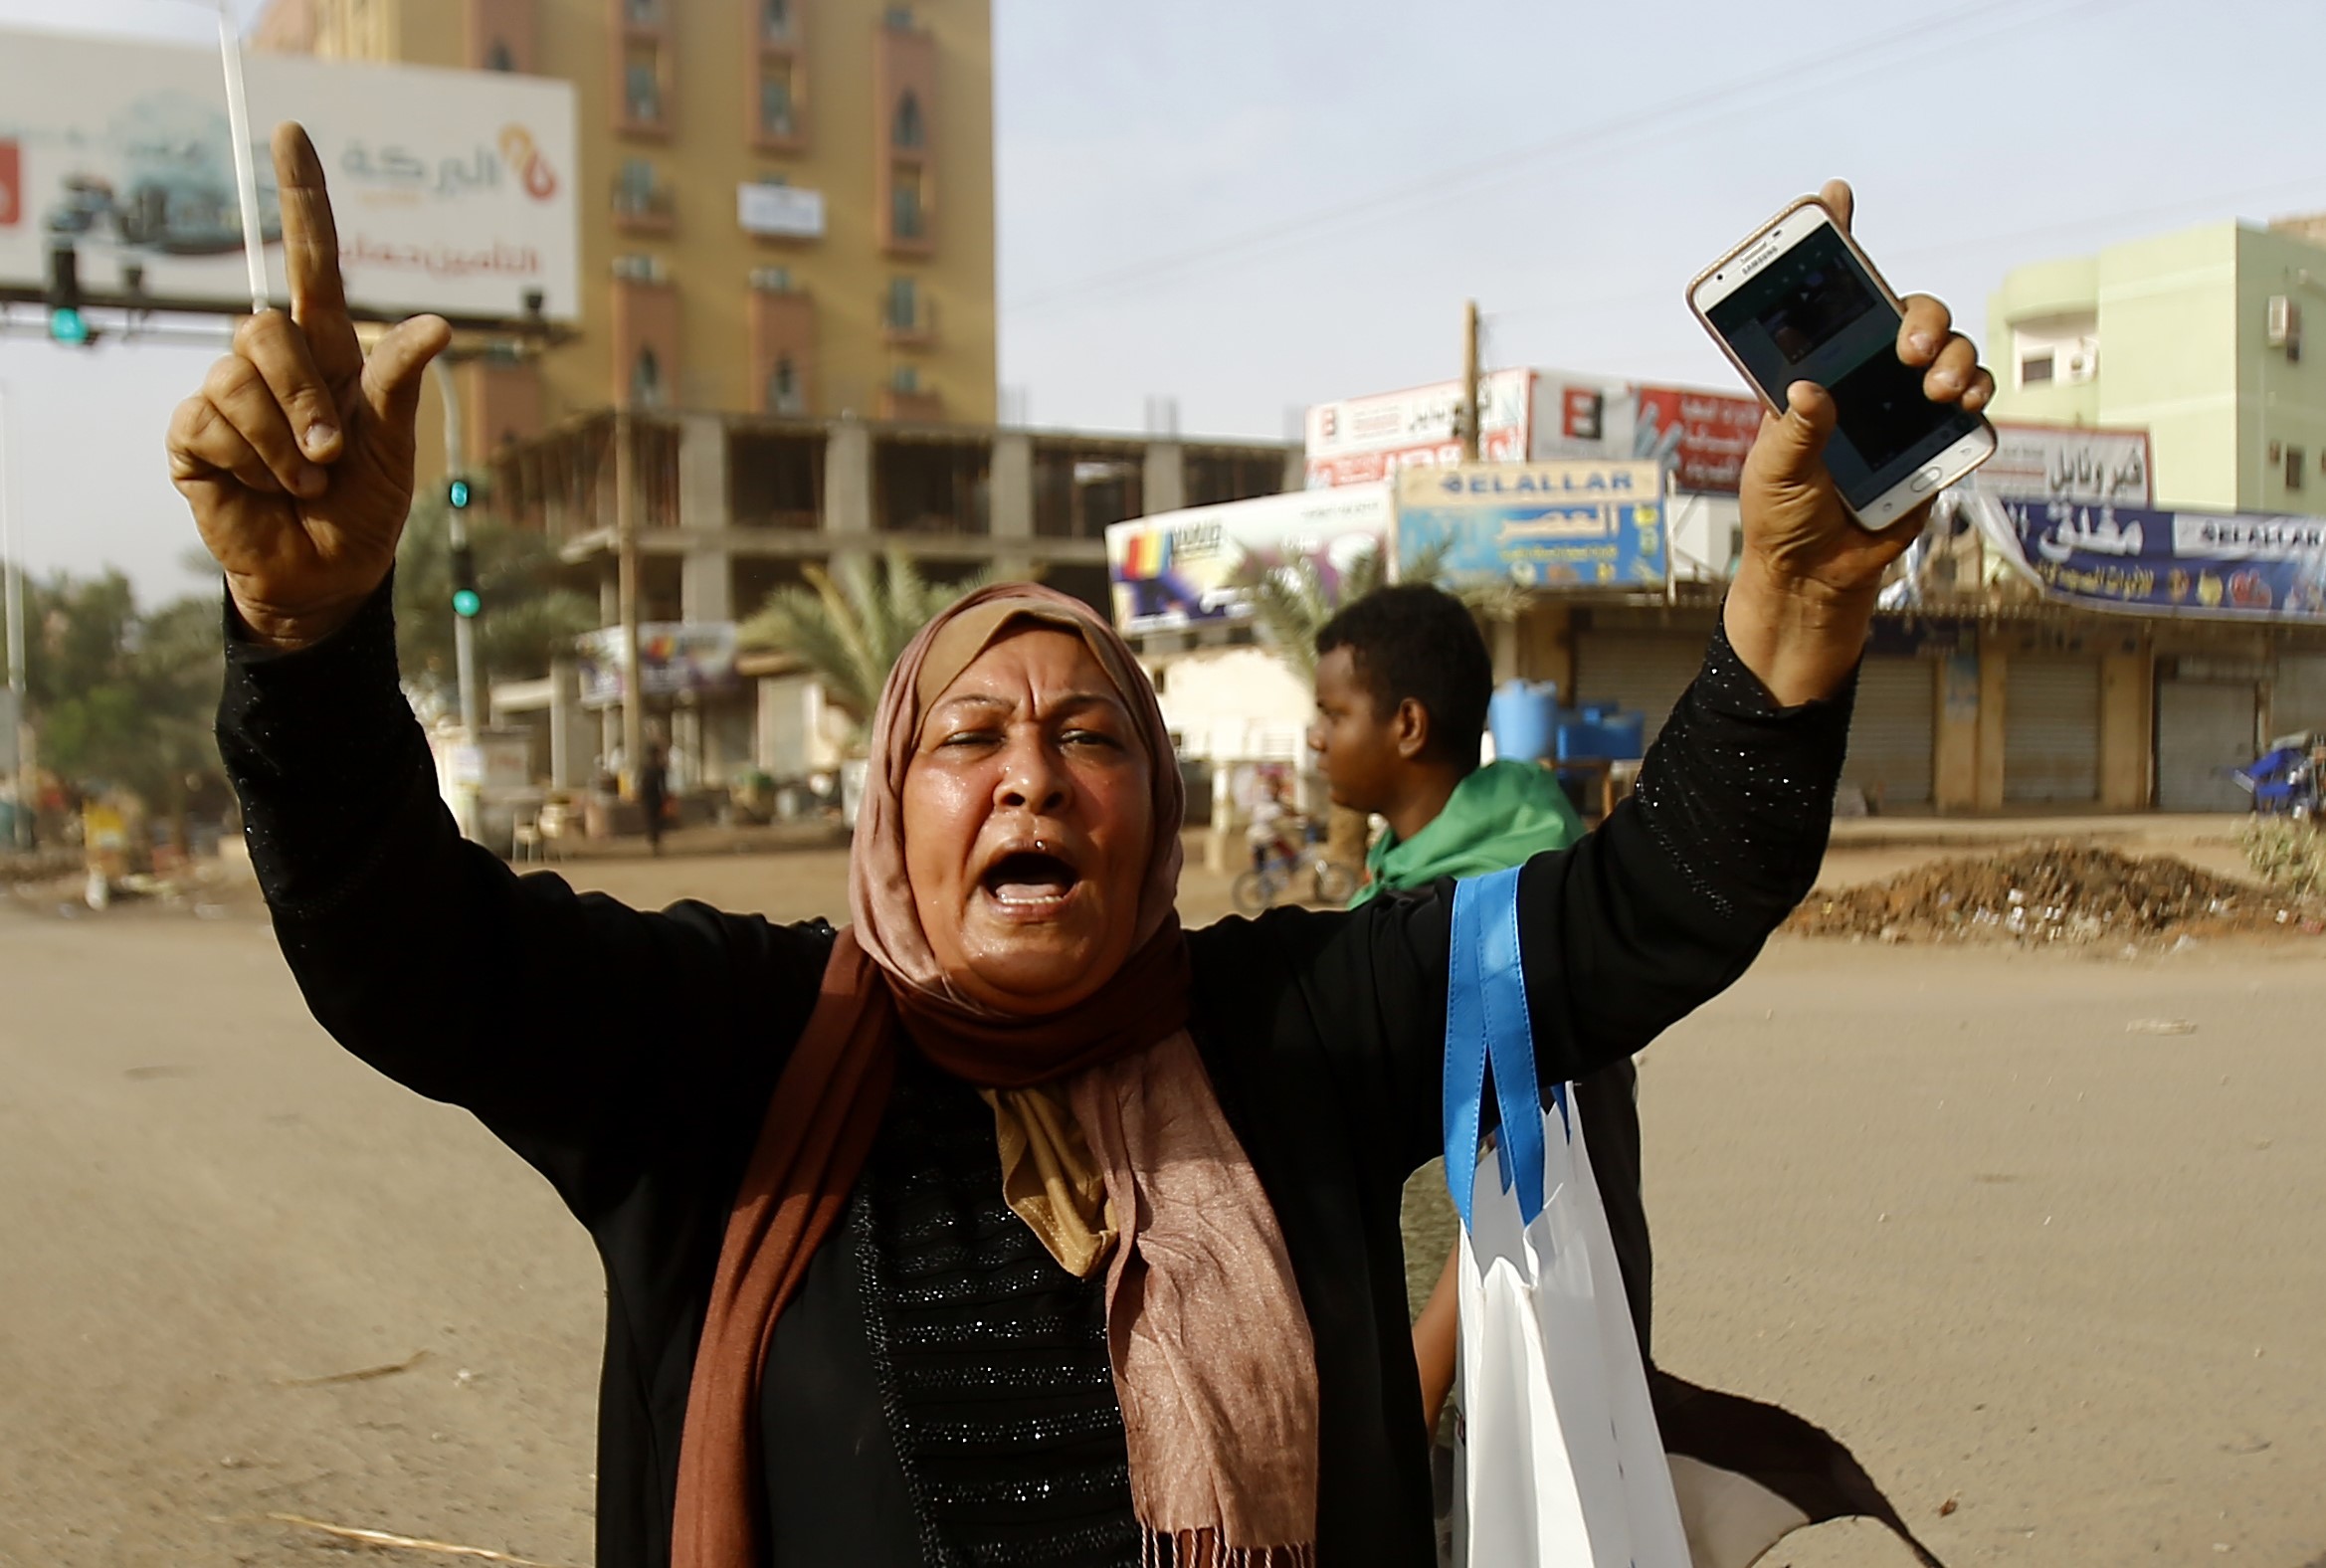 A Sudanese protester reacts as military forces tried to disperse a sit-in outside Khartoum's army headquarters on 3 June (AFP)